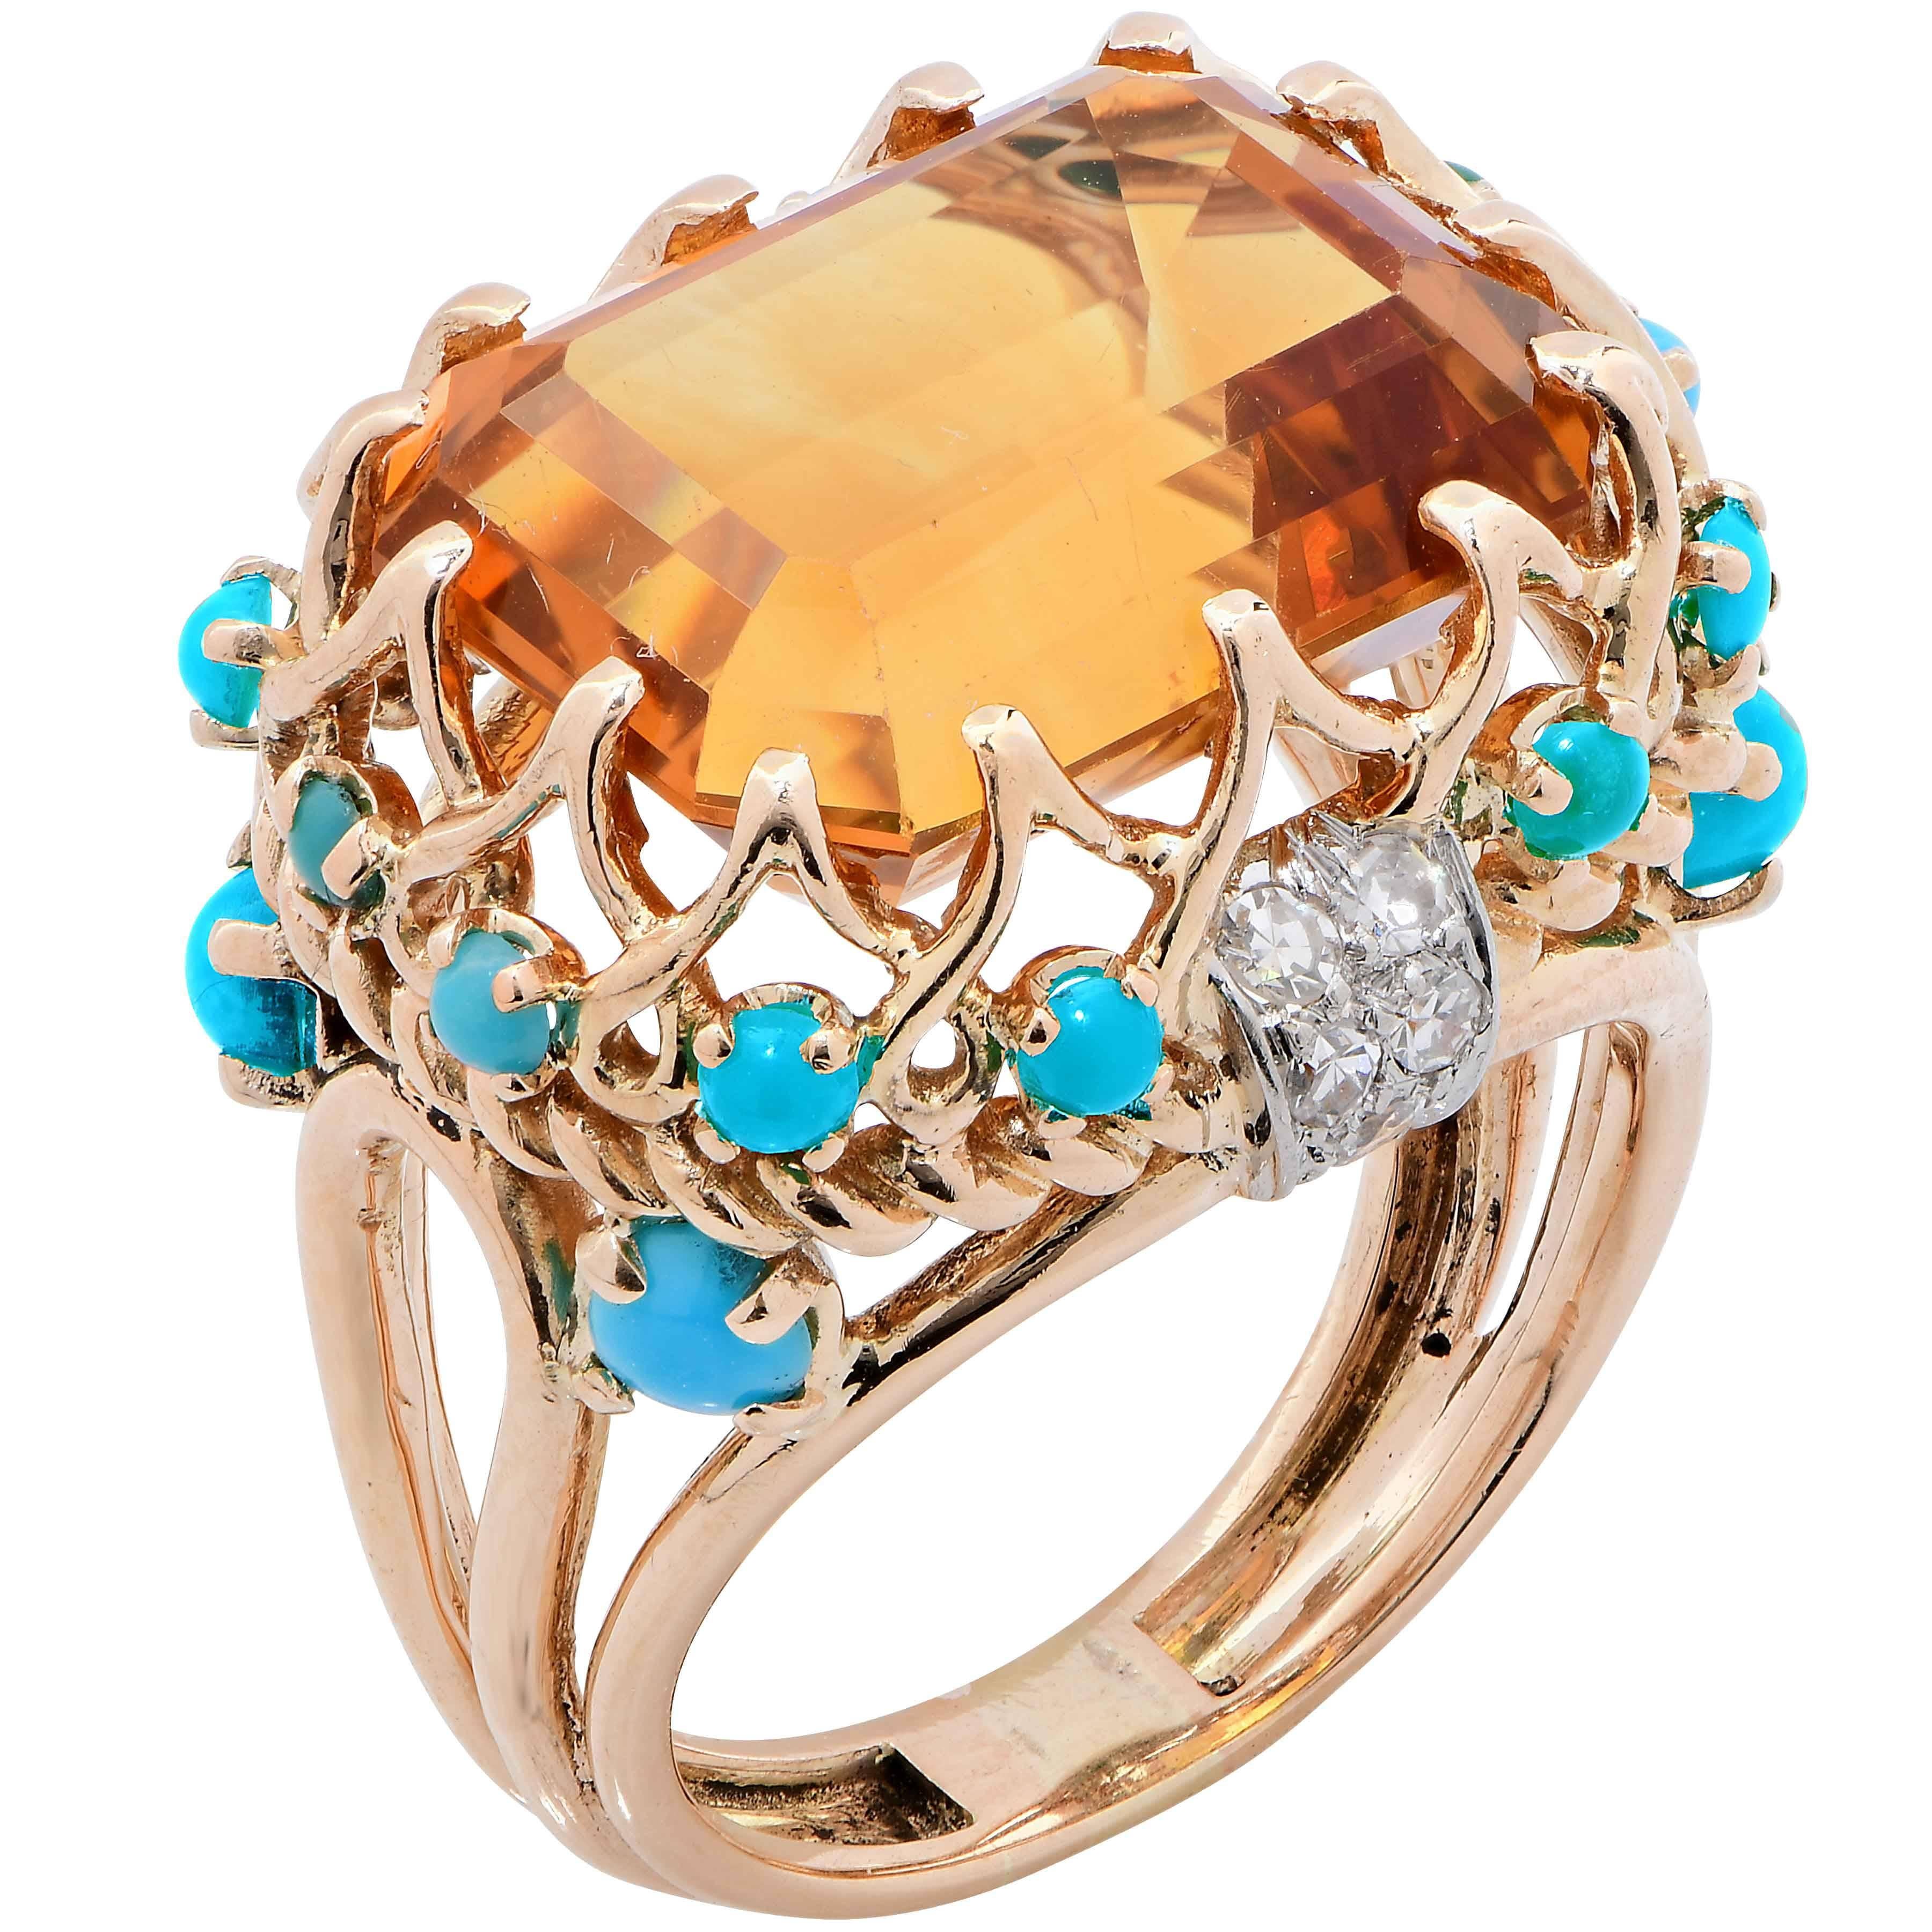 Women's 1990s Faux Turquoise Citrine Diamond Gold Ring